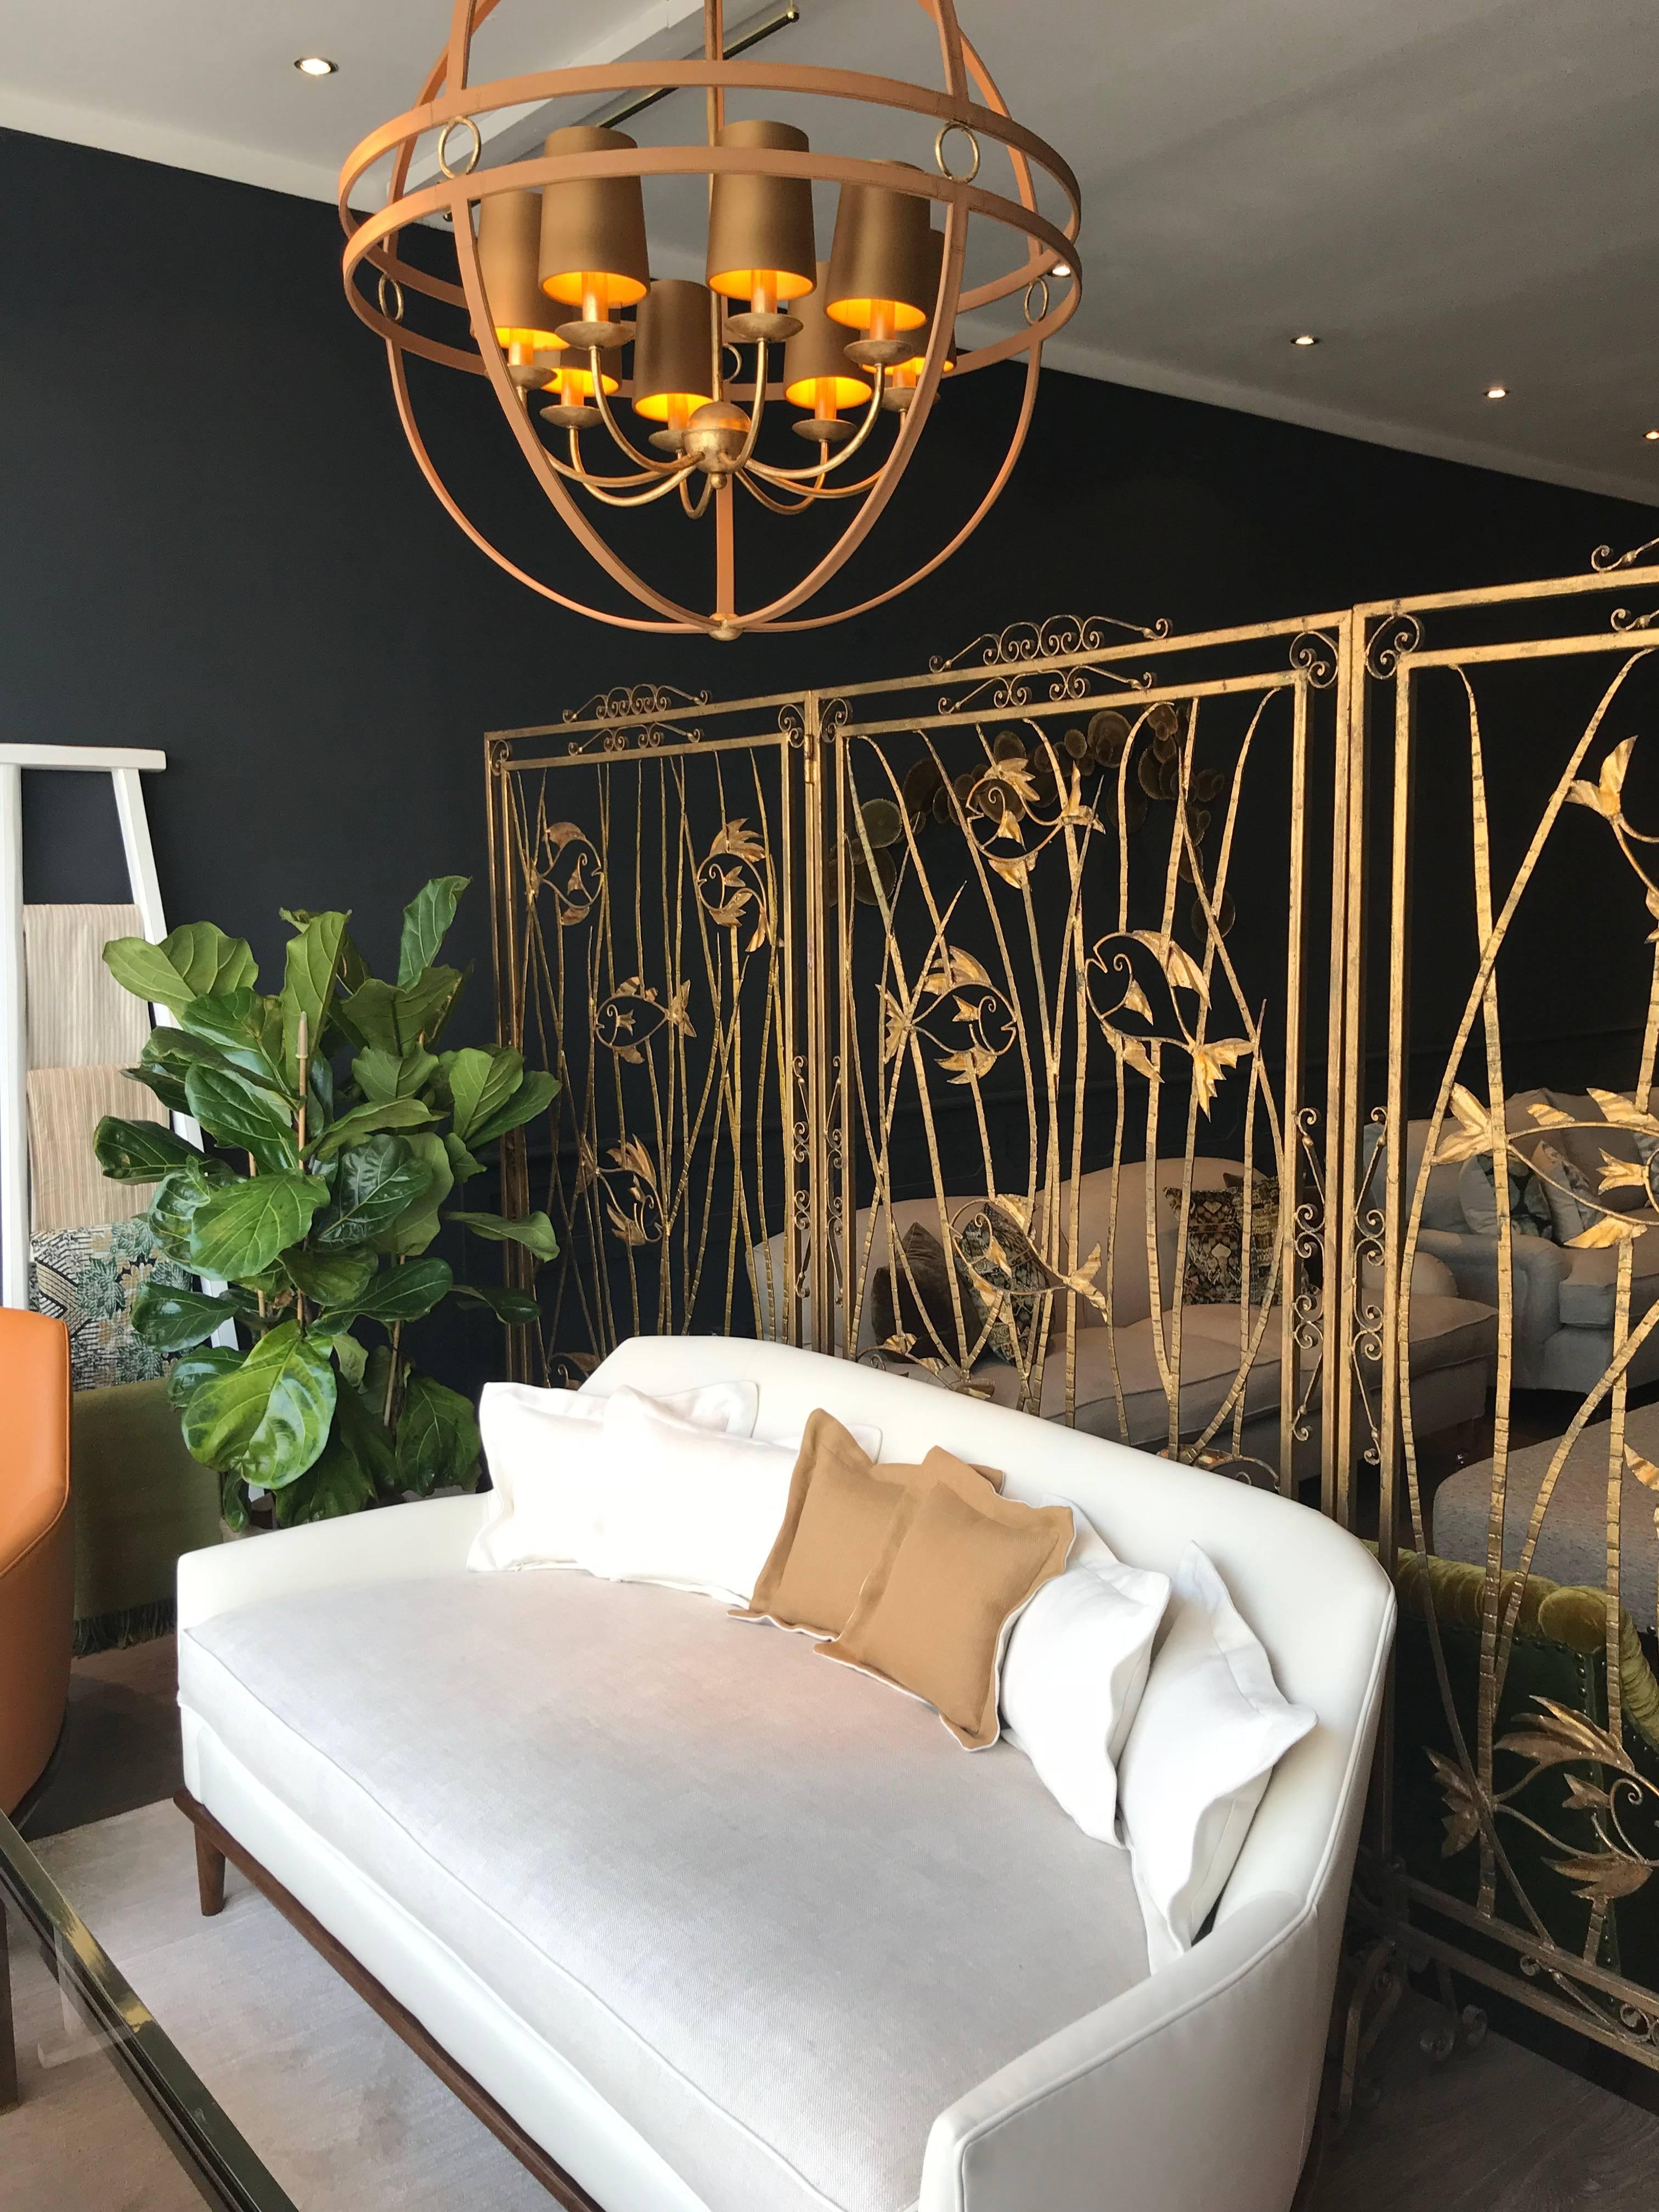 A set of five 1950s French gilt metal screen room dividers each with differing aquatic, underwater fish designs. They all free stand on removable legs or can be joined together with the hinge brackets on each to create a 5m room divider.
Beautiful